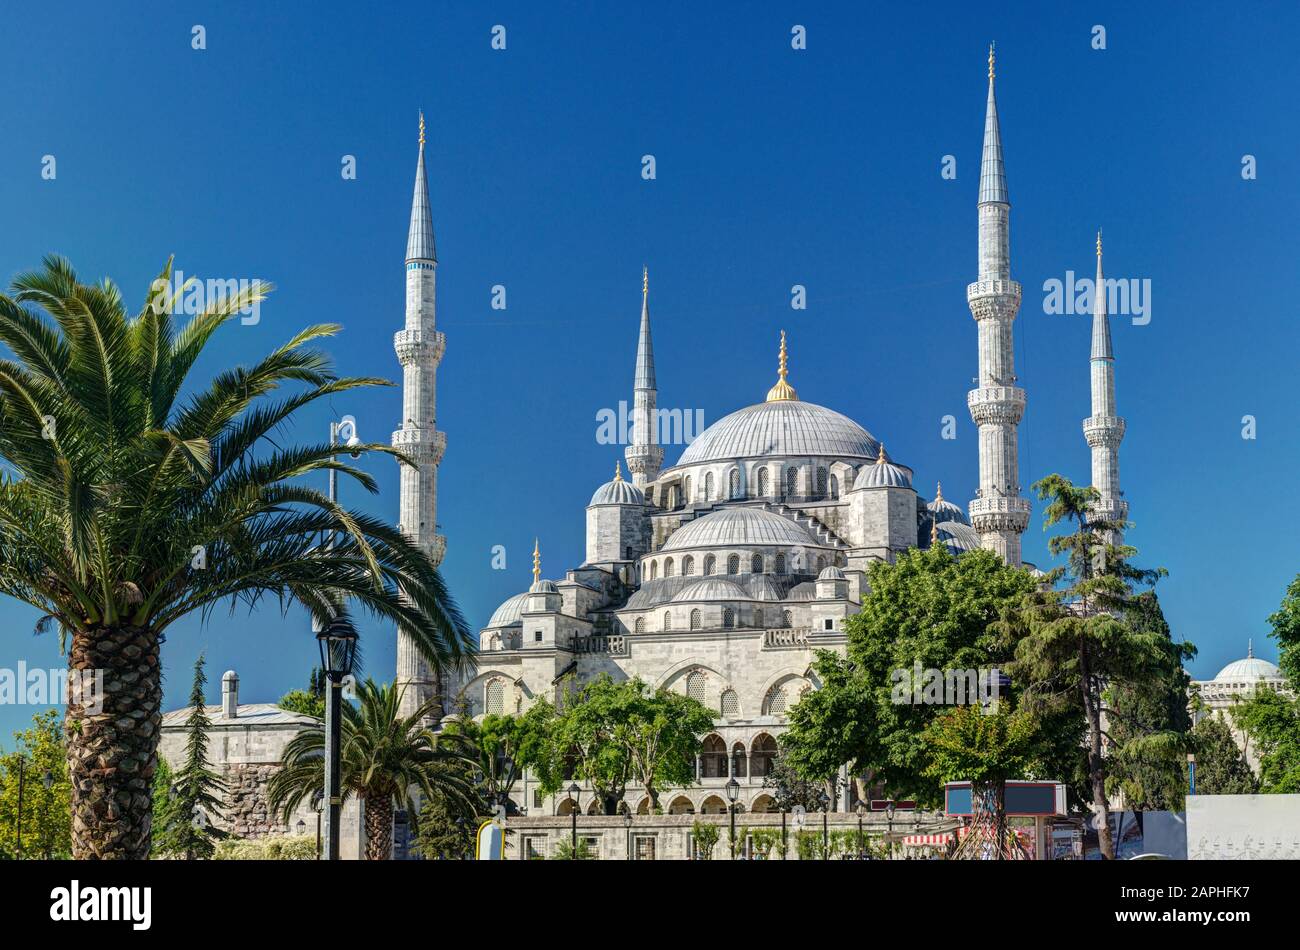 View of the Blue Mosque in Istanbul, Turkey. The Blue Mosque (Sultanahmet Camii) is a historical monument and a beautiful mosque in Istanbul. Stock Photo